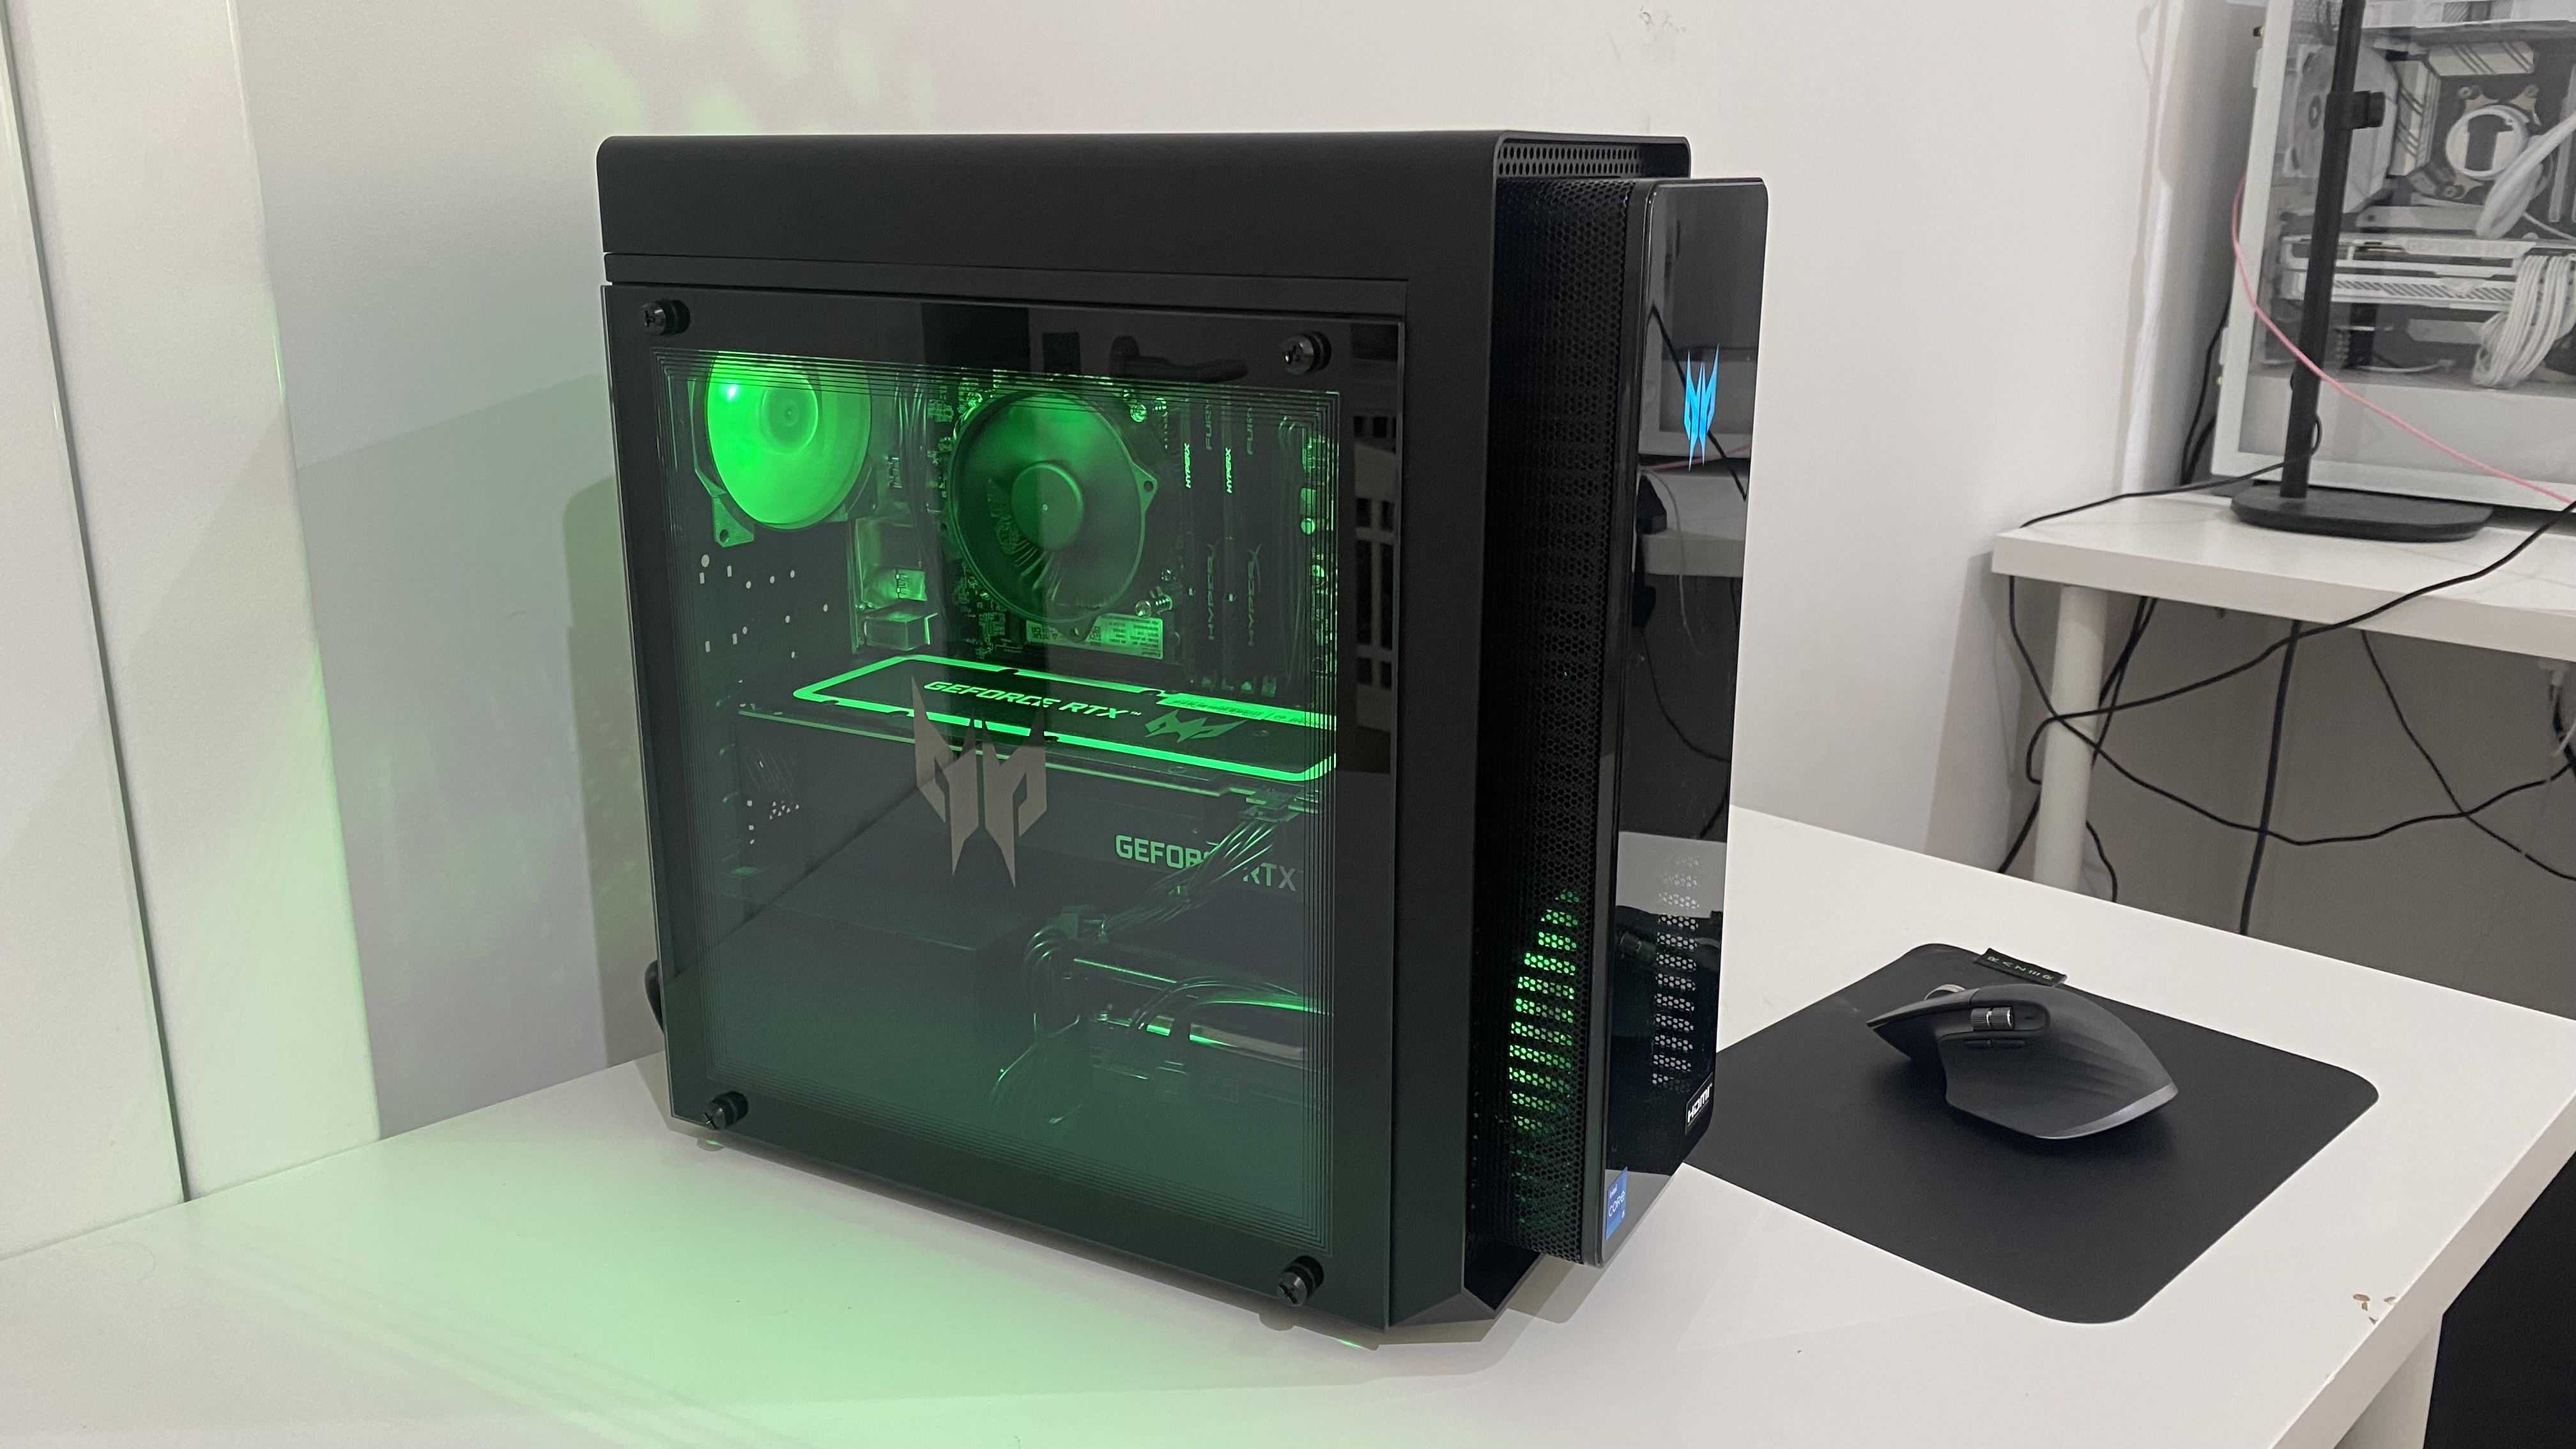 Acer Predator Orion 3000 desktop gaming PC shown side-on on a desk with RGB lighting turned on.